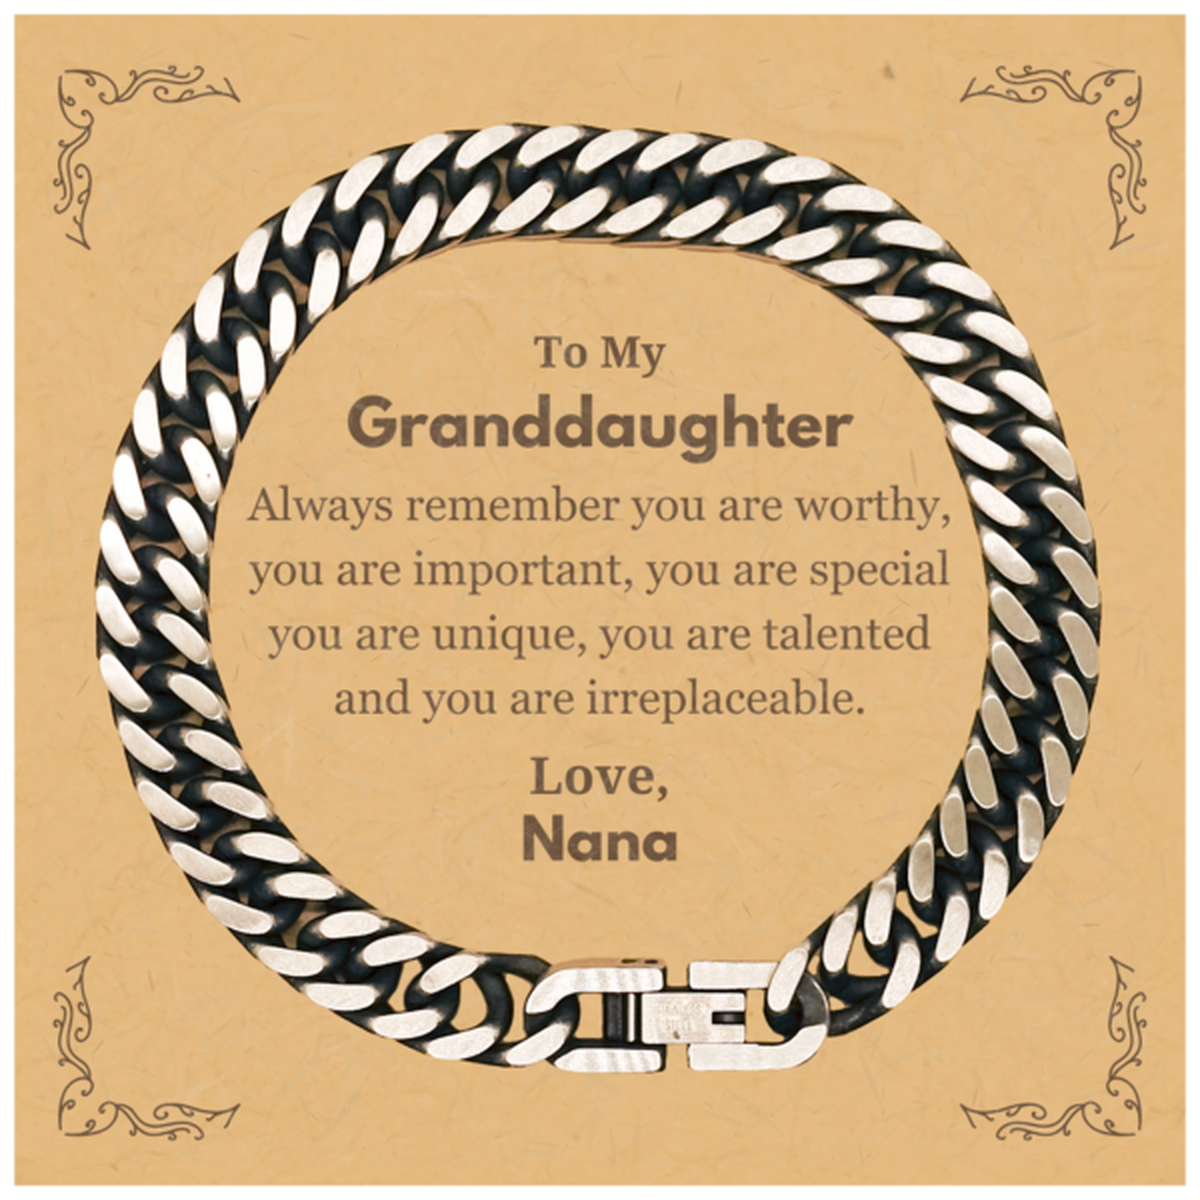 Granddaughter Birthday Gifts from Nana, Inspirational Cuban Link Chain Bracelet for Granddaughter Christmas Graduation Gifts for Granddaughter Always remember you are worthy, you are important. Love, Nana